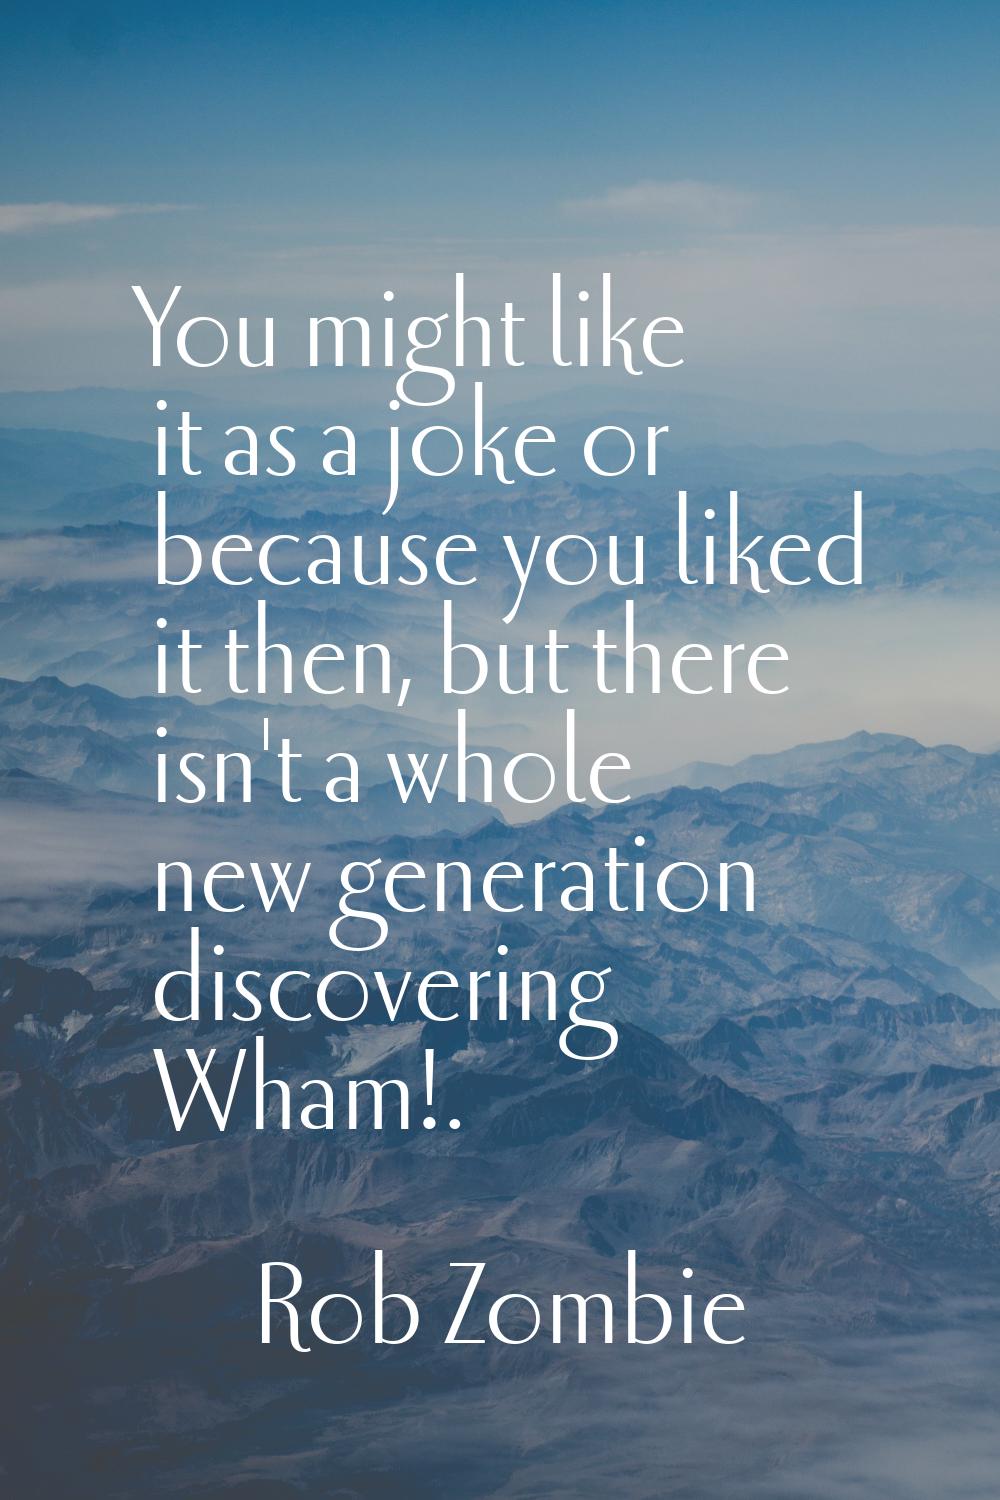 You might like it as a joke or because you liked it then, but there isn't a whole new generation di